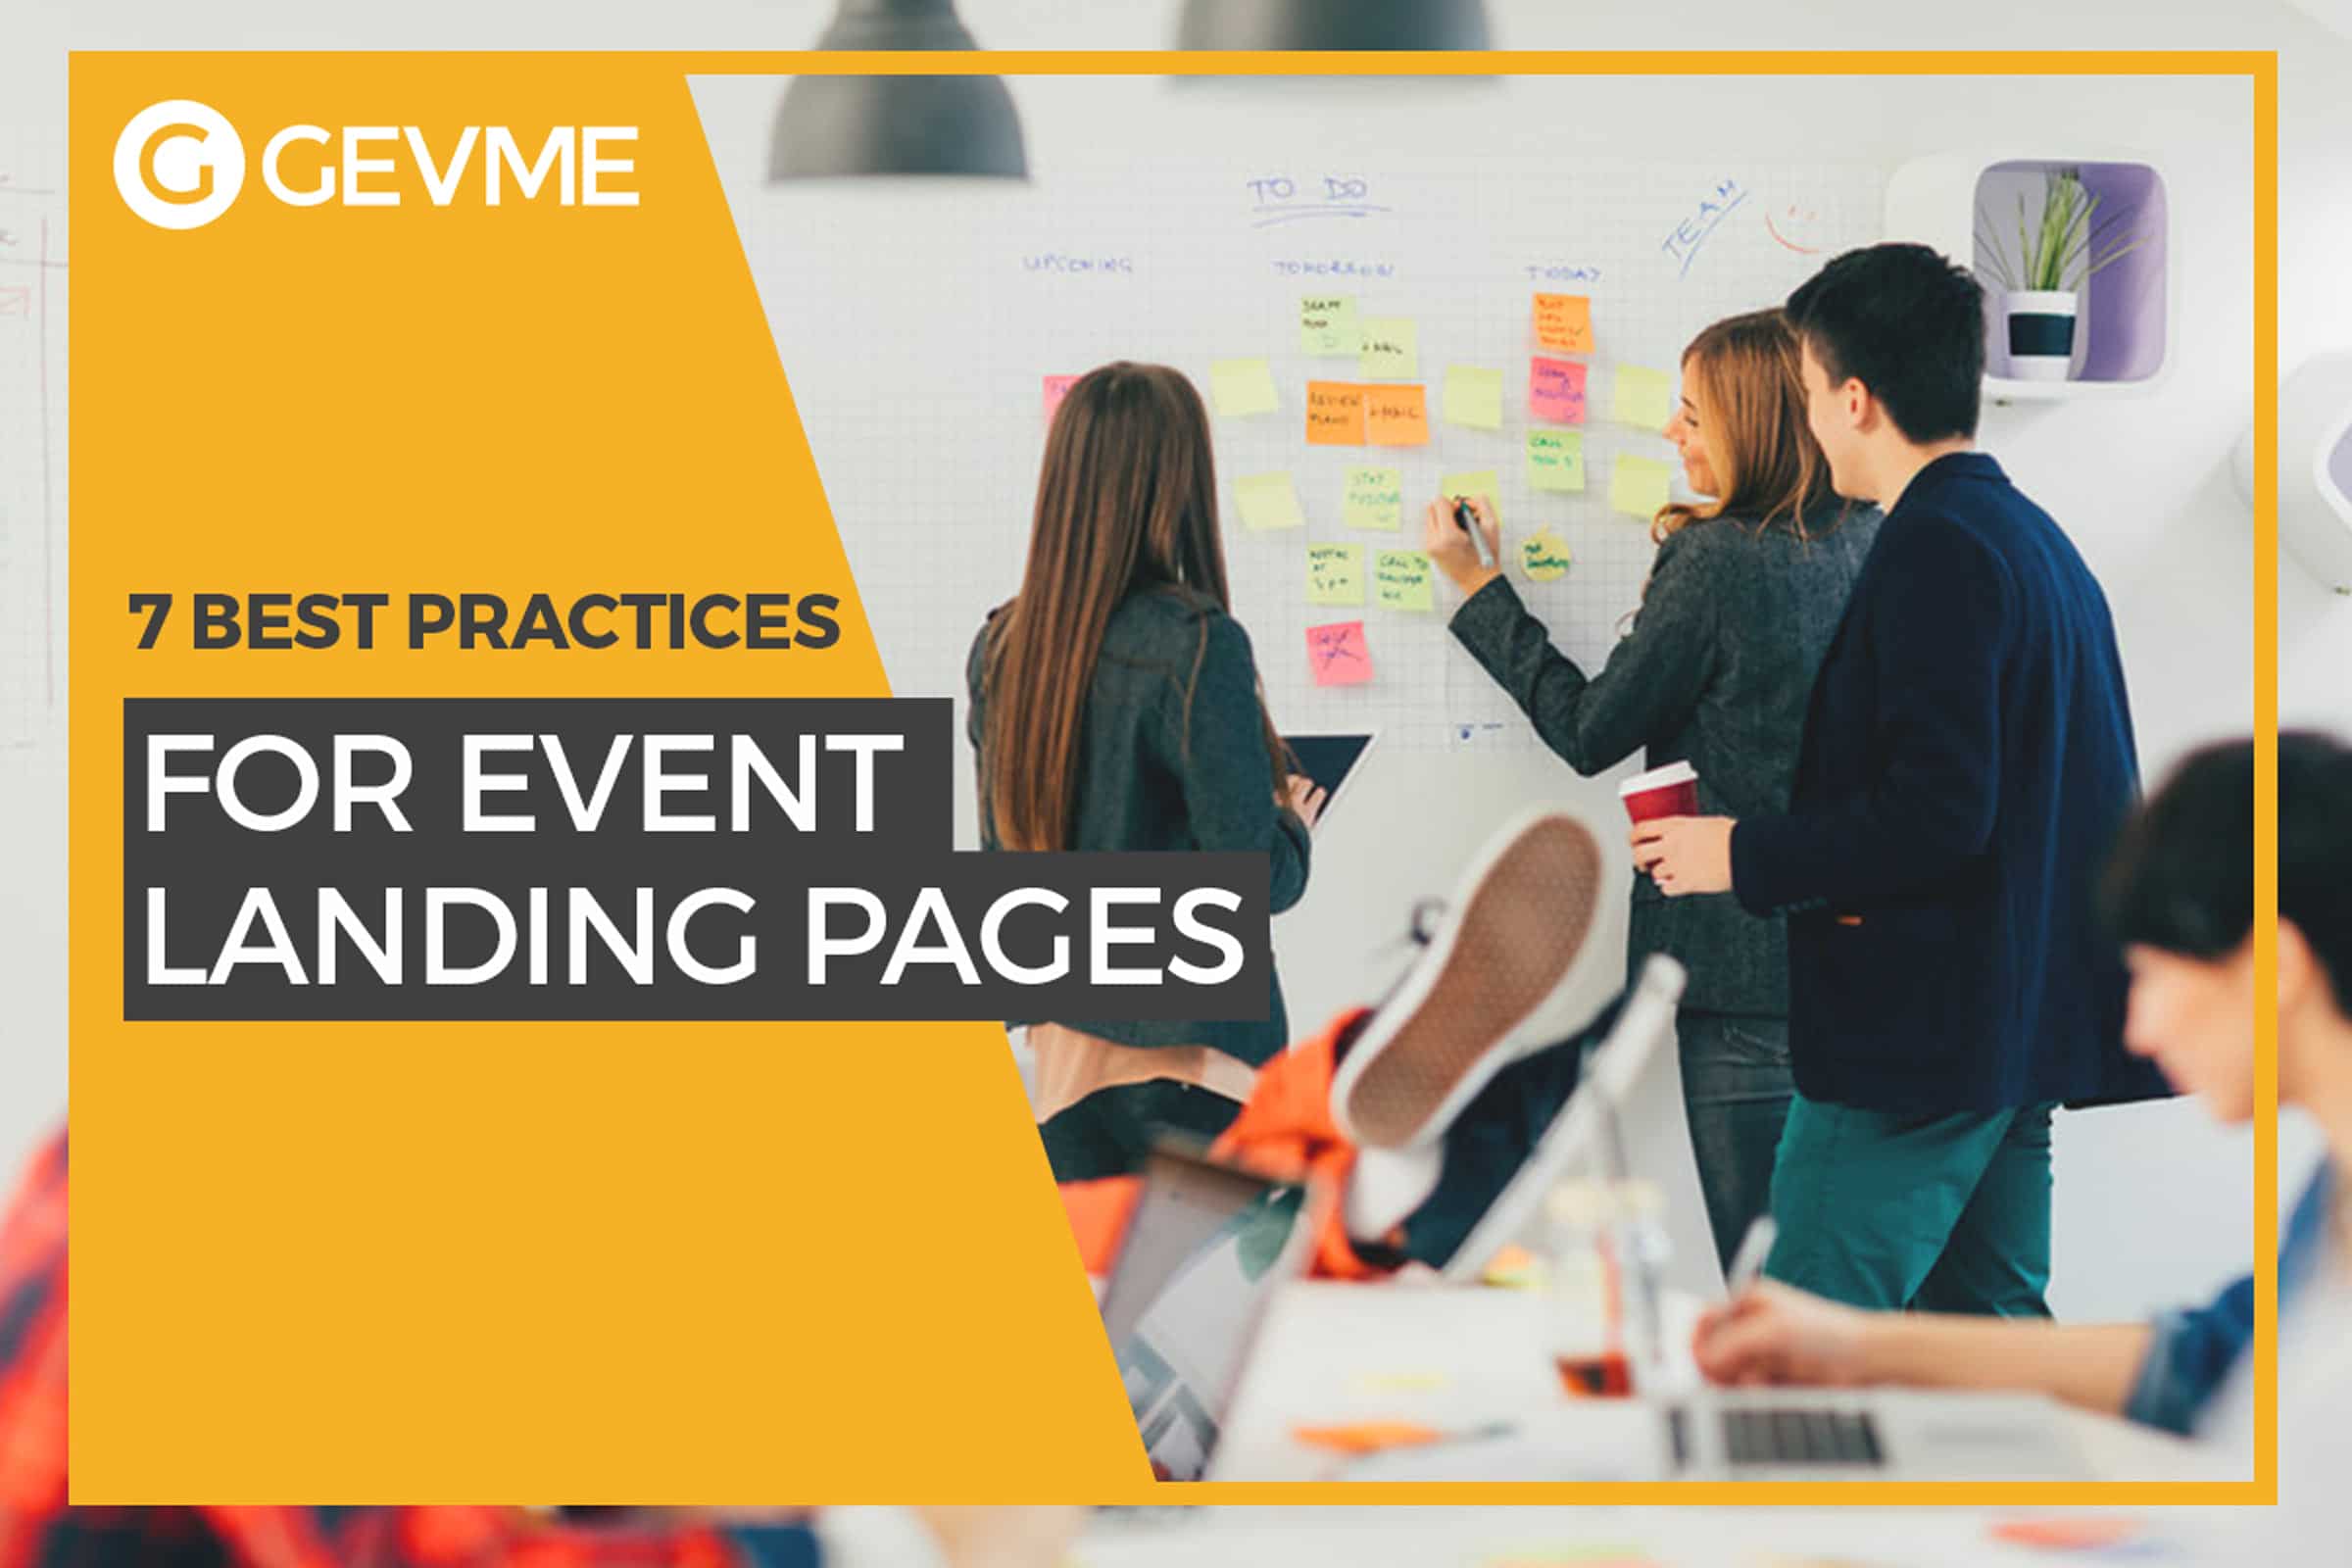 7 best practices for event landing pages